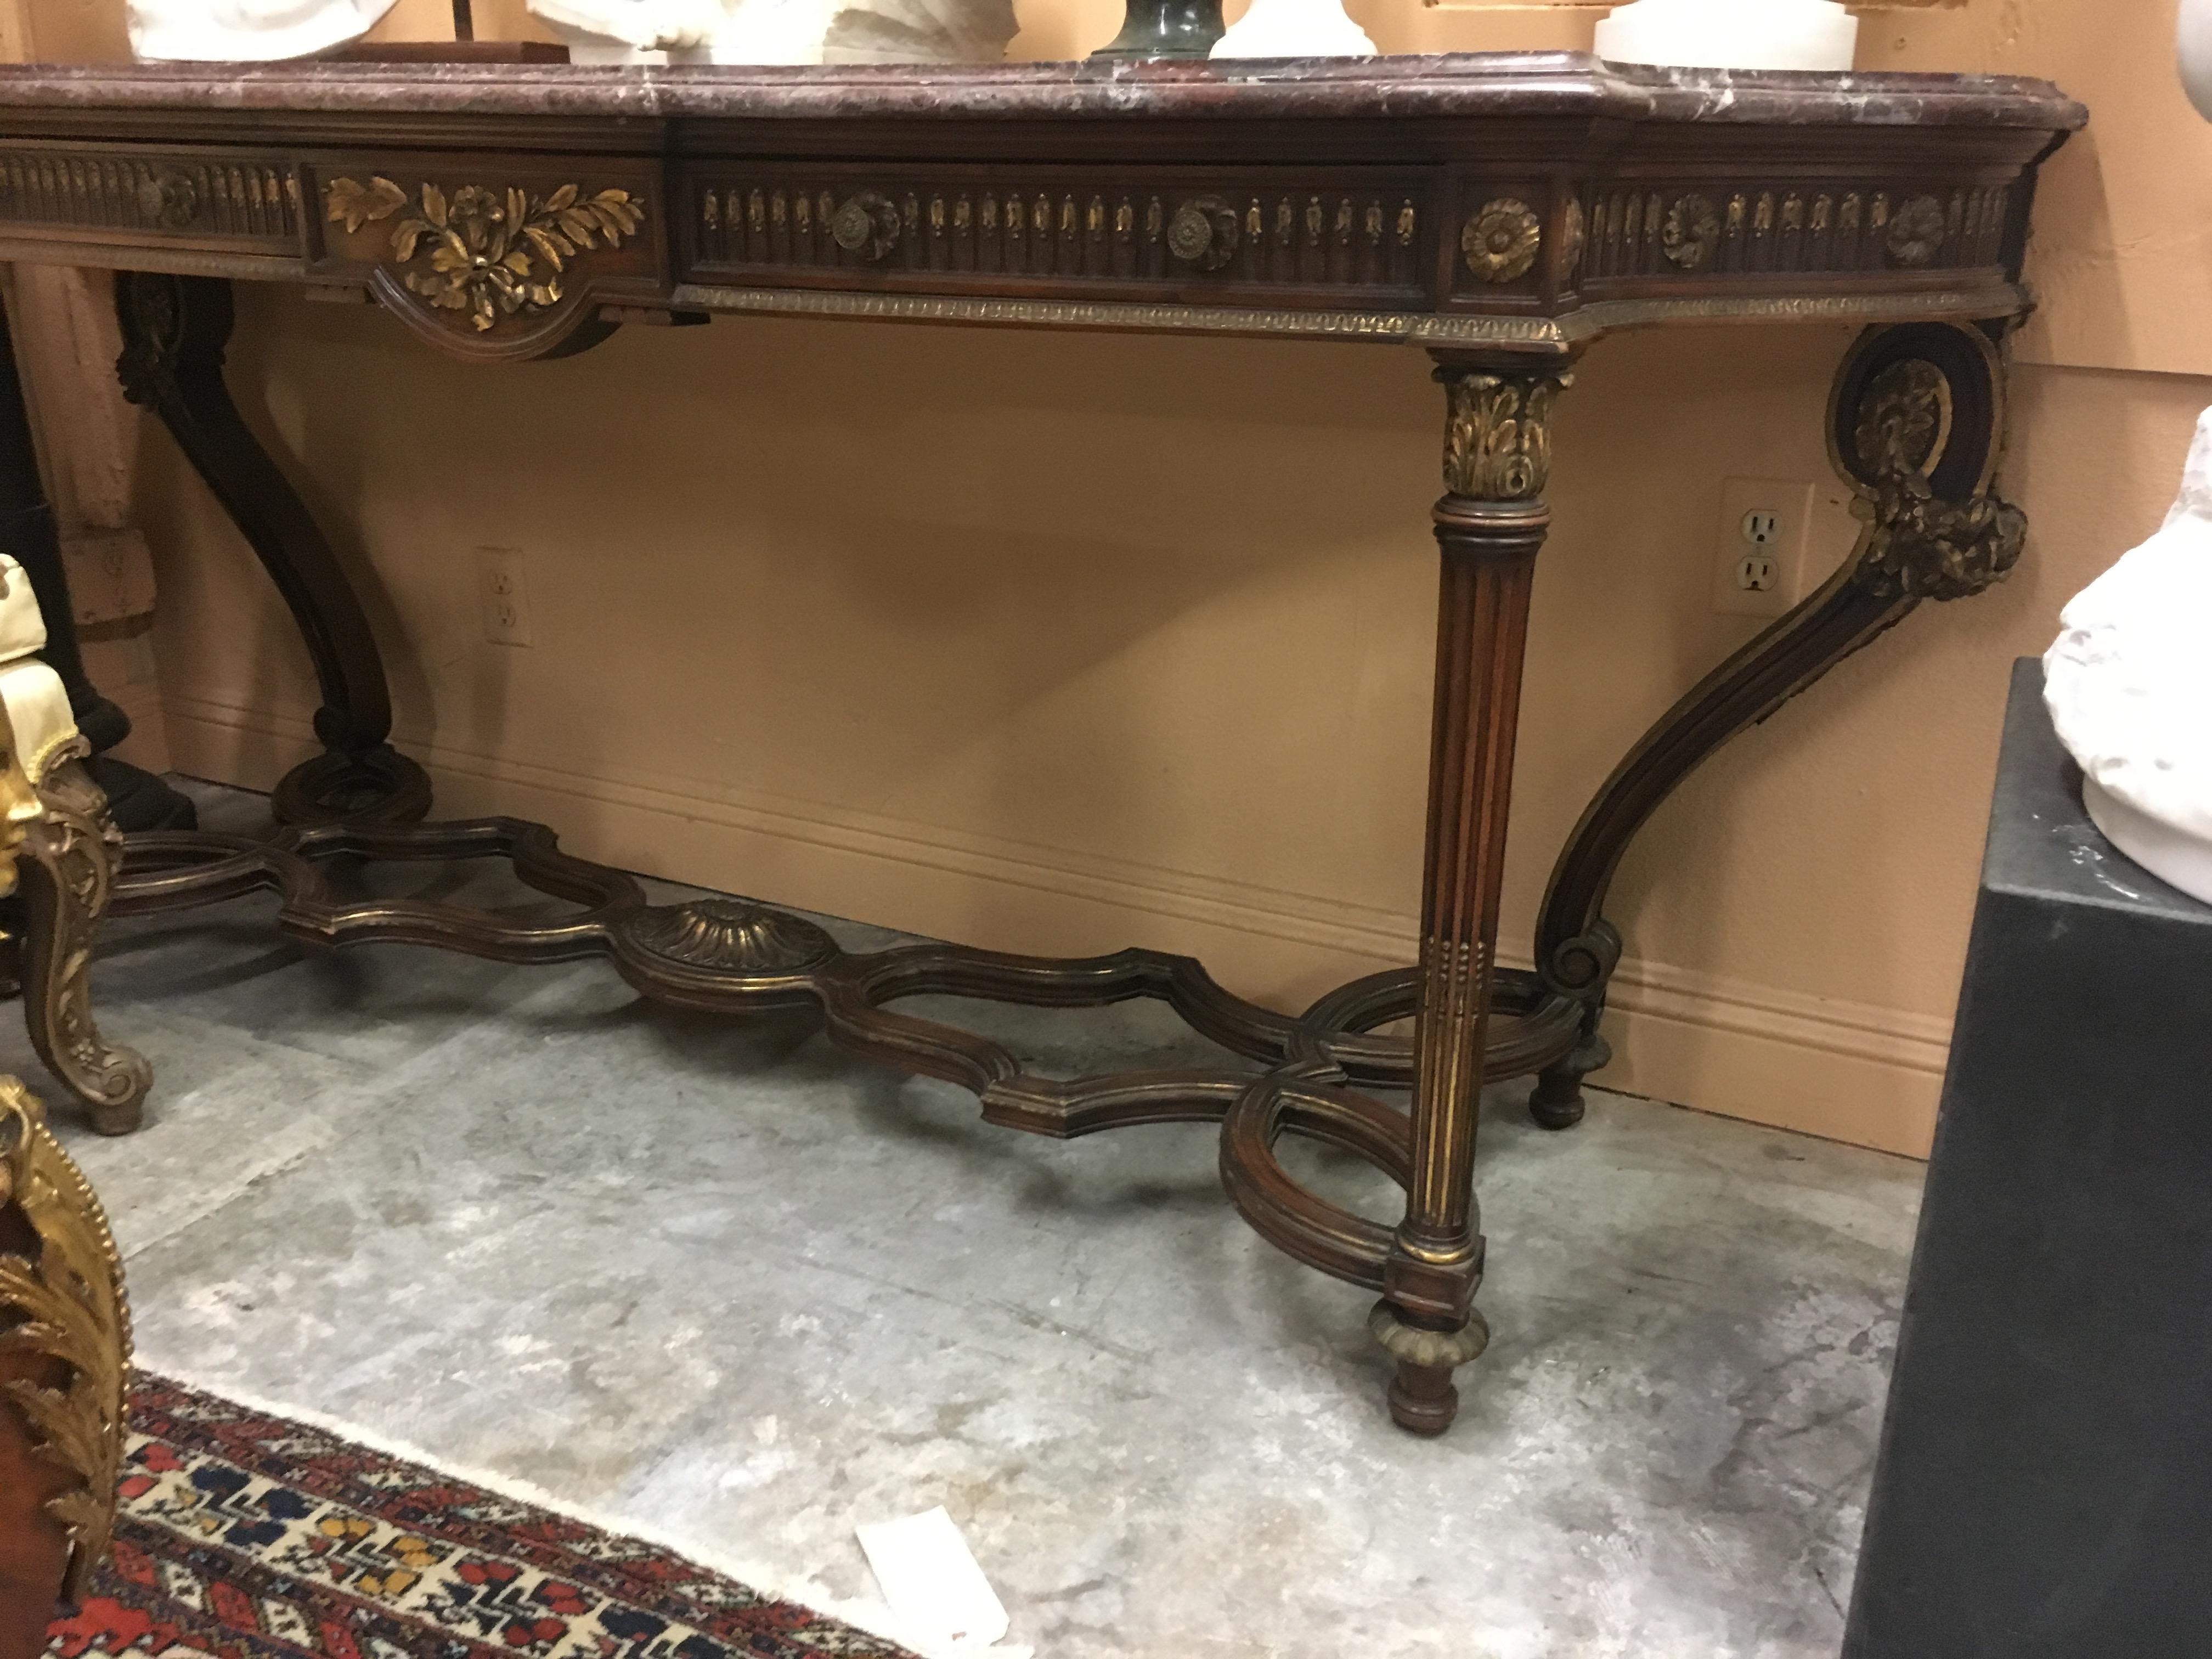 Spectacular Italian neoclassical style parcel-gilt beachwood and marble console table, late 19th-early 20th century.

The moulded purple and Rouge marble top is over a neoclassical style frieze fitted with two drawers beautifully carved with